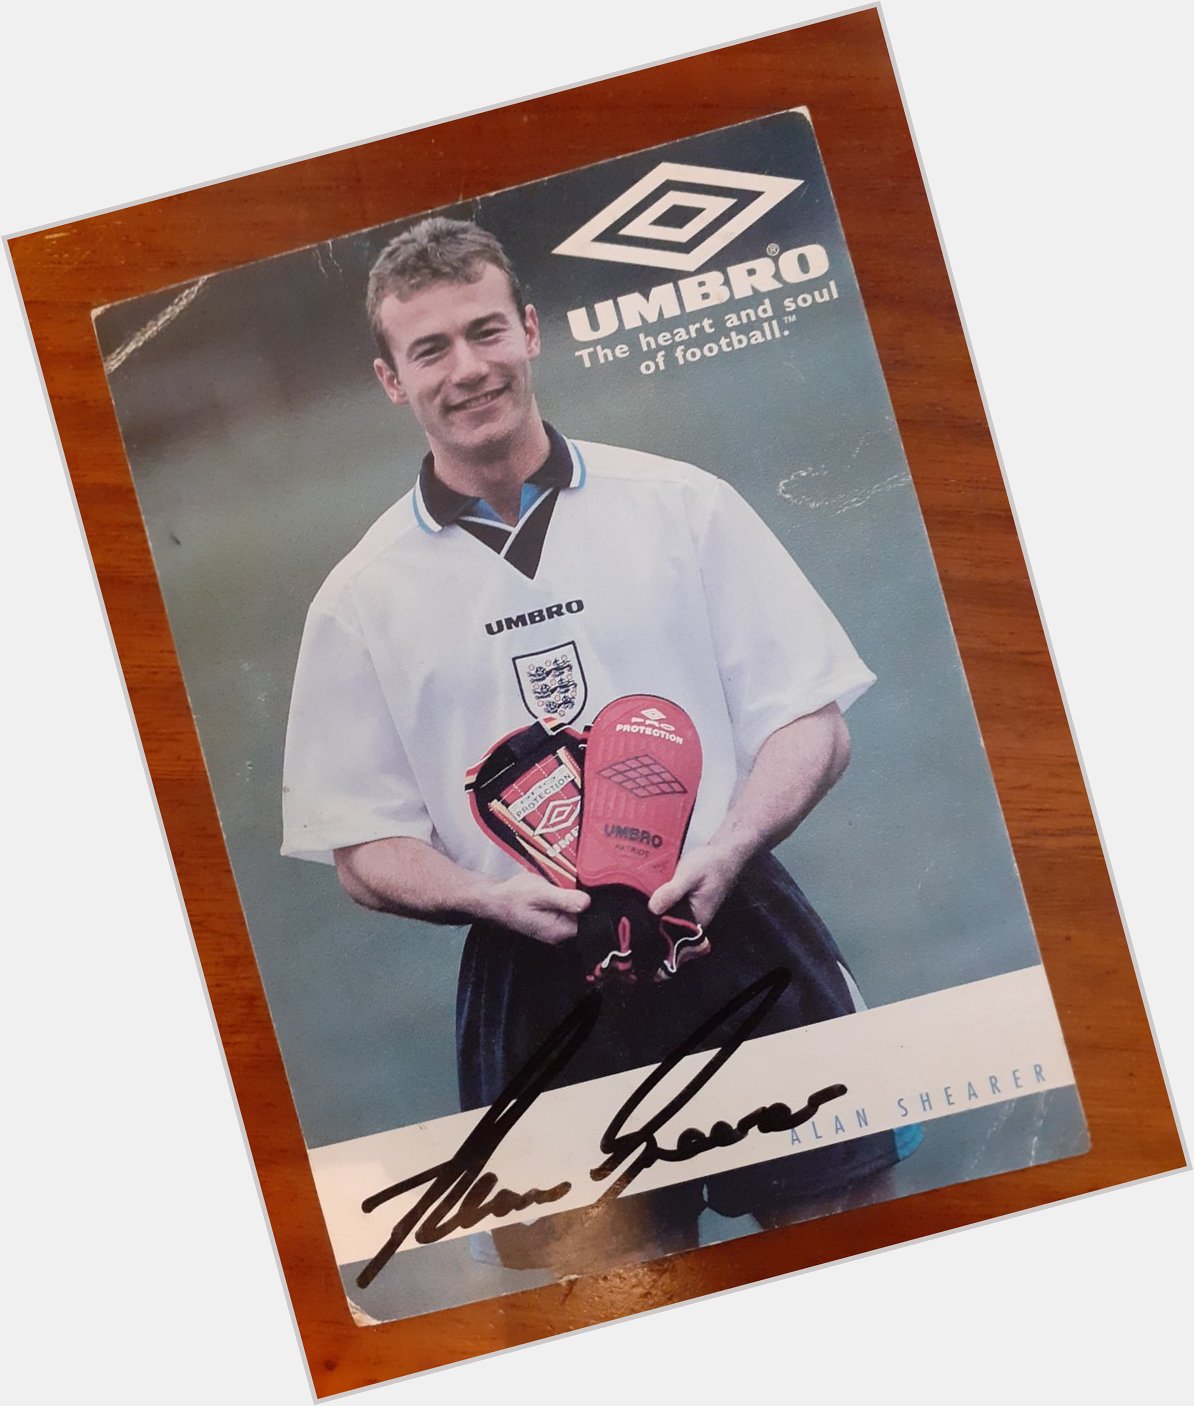 My prized possession as a kid. Happy birthday Alan Shearer  